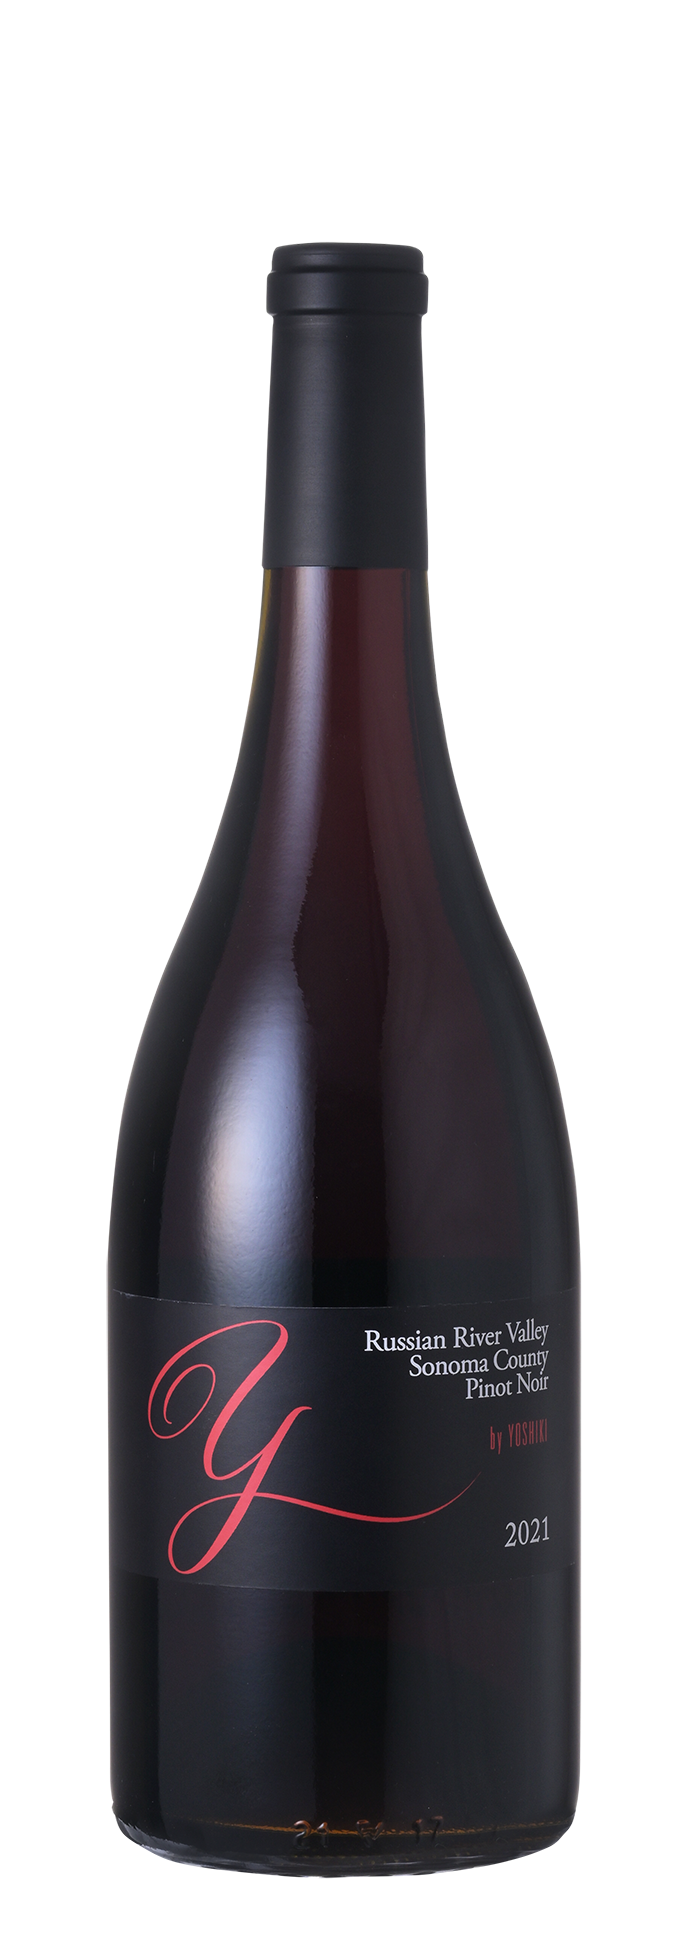 Pinot Noir Russian River Valley Sonoma County 2021